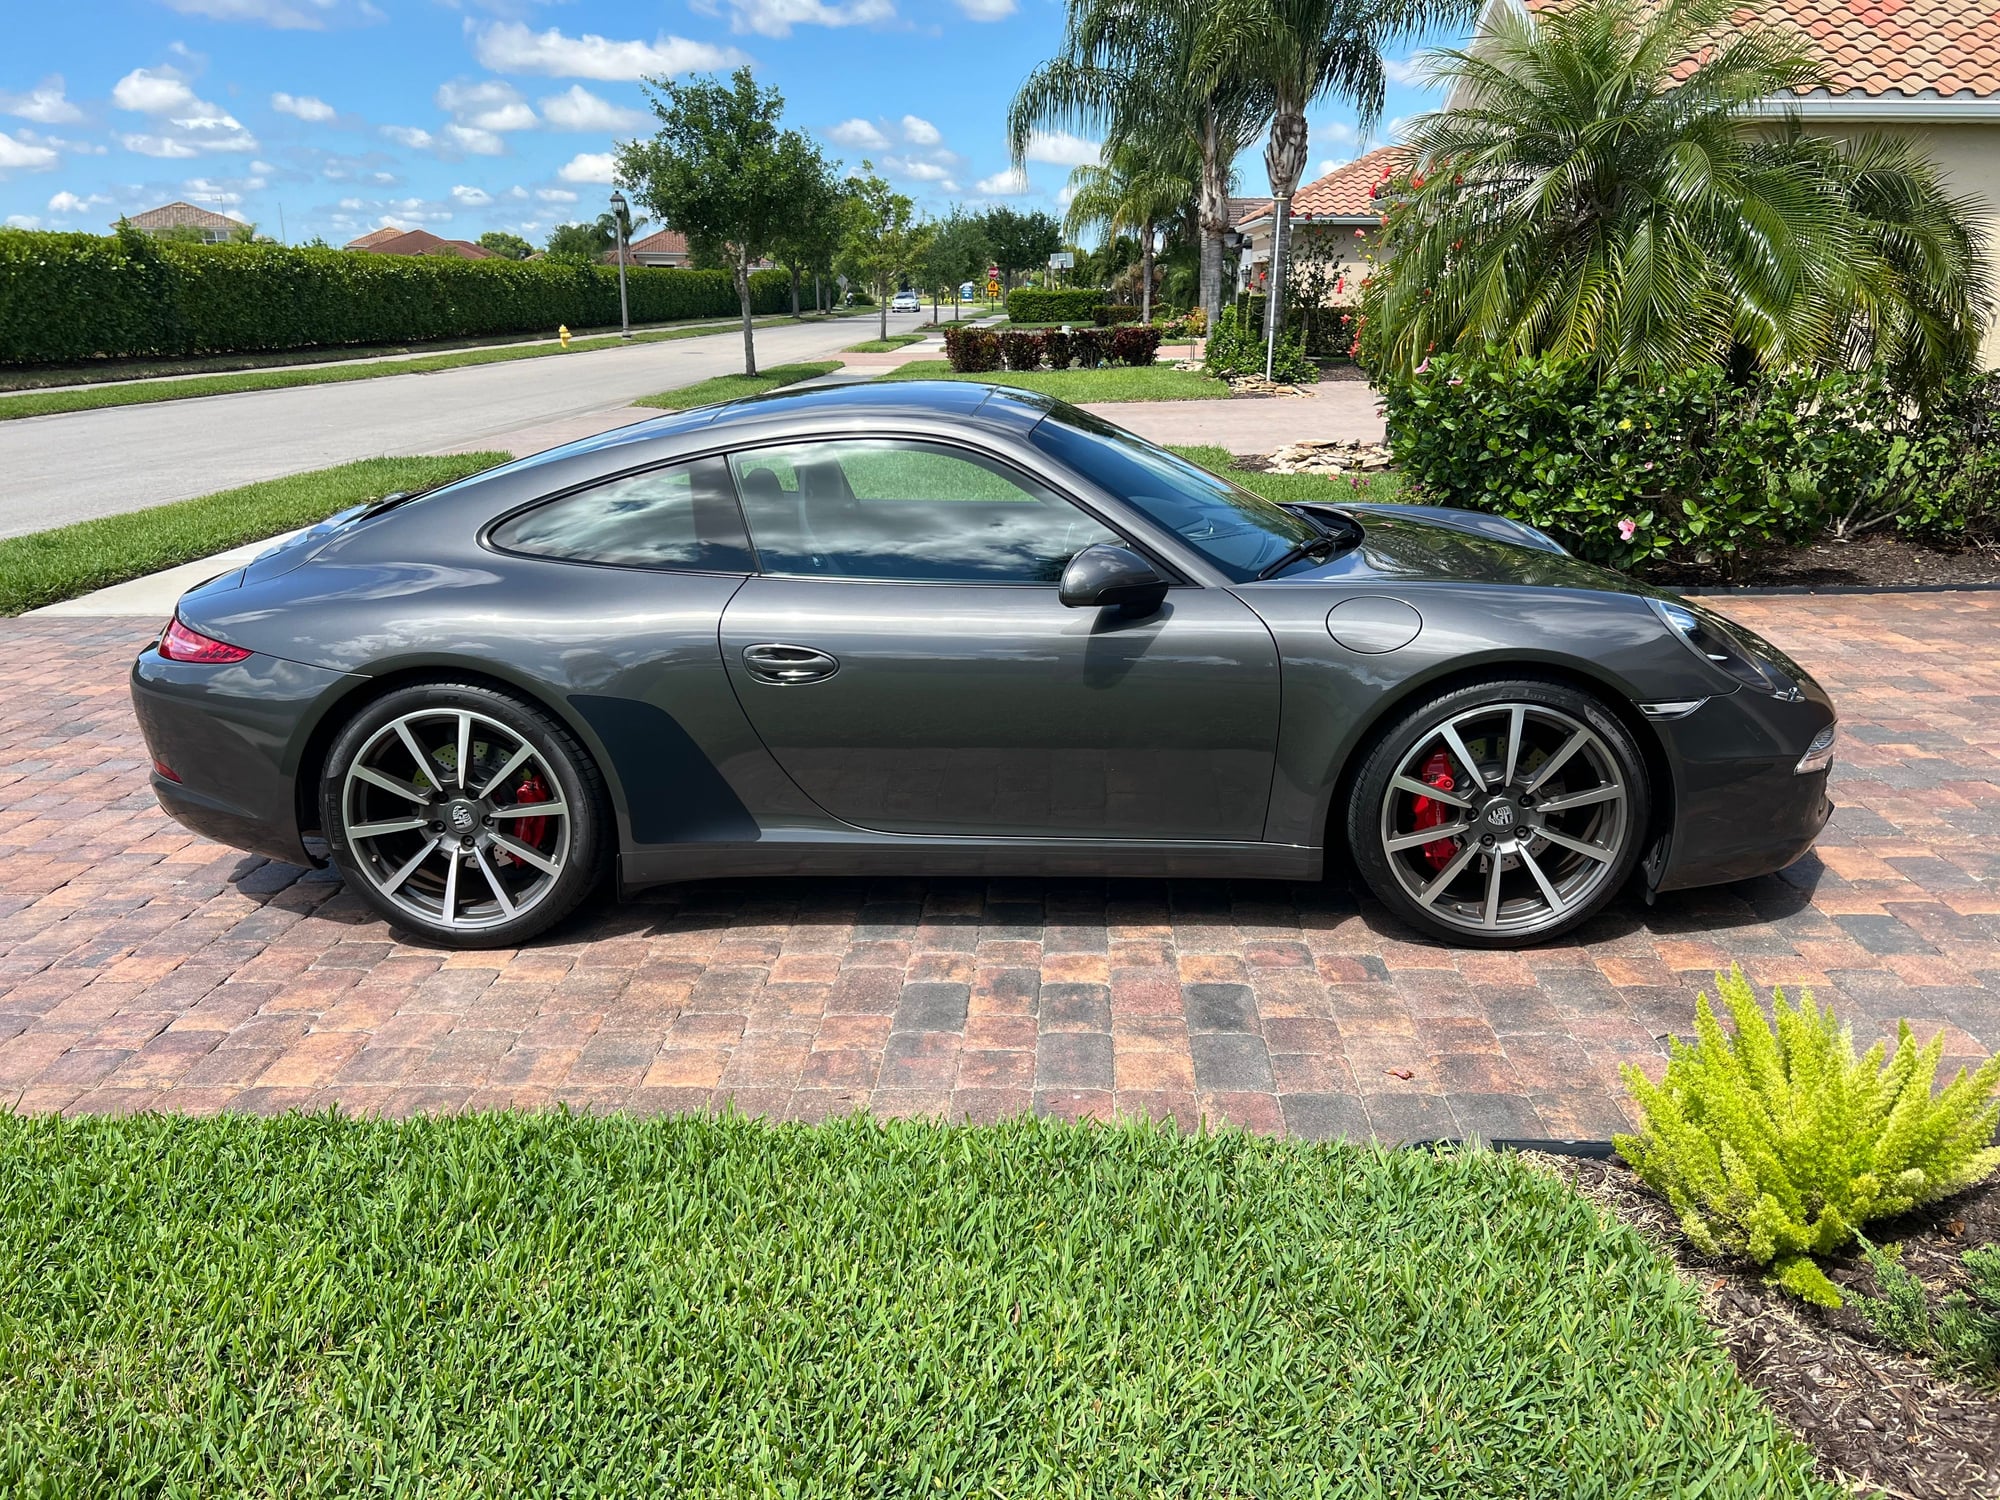 2013 Porsche 911 - 2013 Porsche 911 Carrera S PDK - Used - VIN WP0AB2A94DS121244 - 68,935 Miles - 6 cyl - 2WD - Automatic - Coupe - Gray - Ave Maria, FL 34142, United States